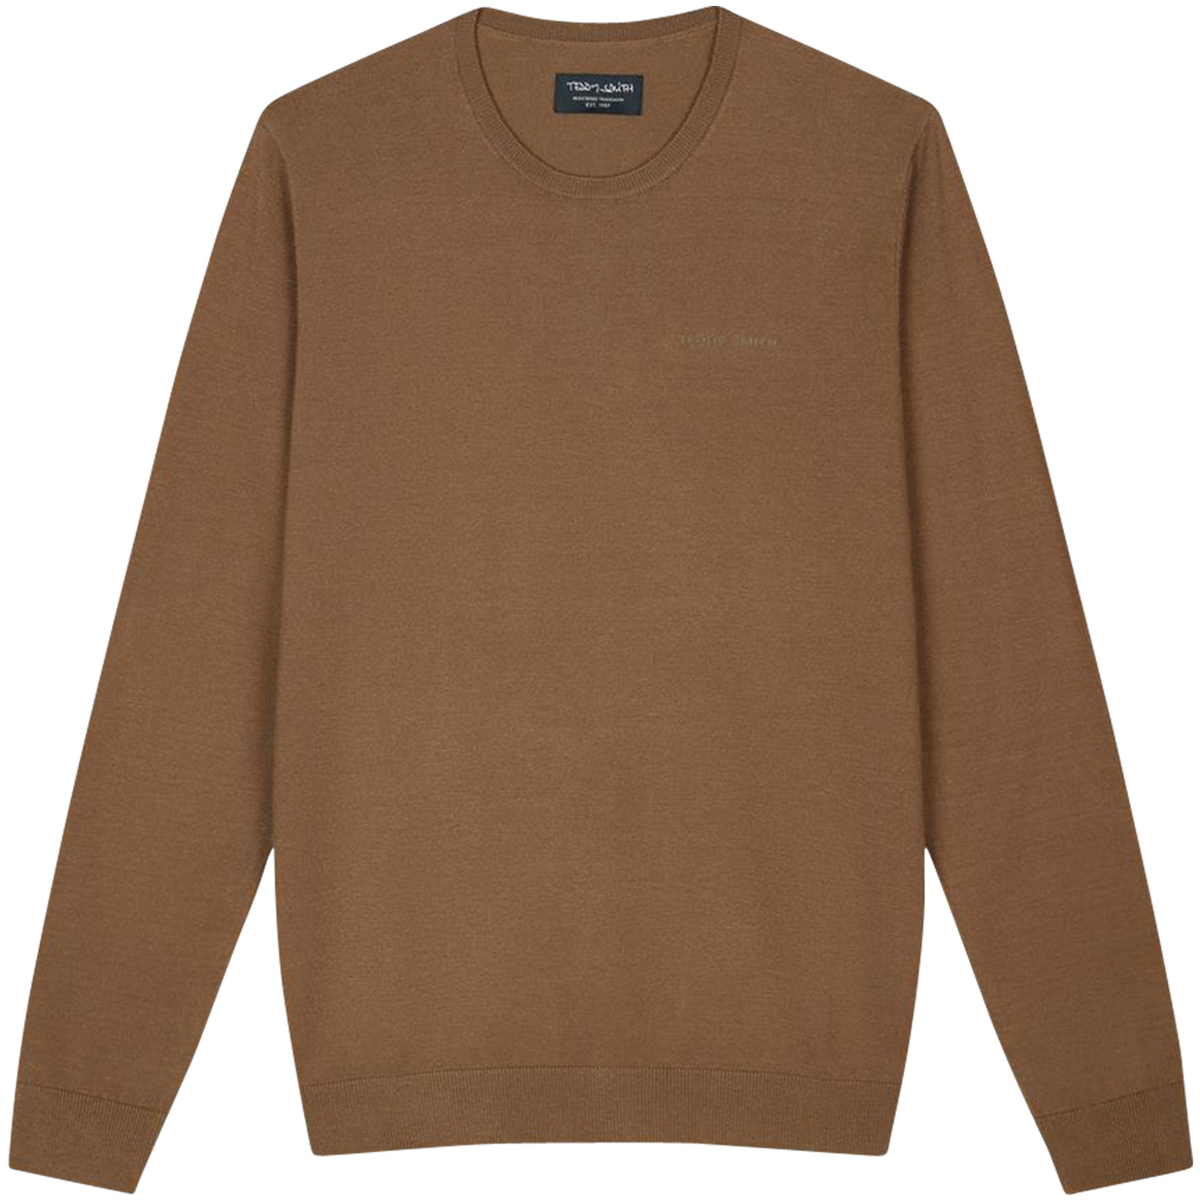 Vêtements Homme Pulls Teddy Smith Pull col rond Marron